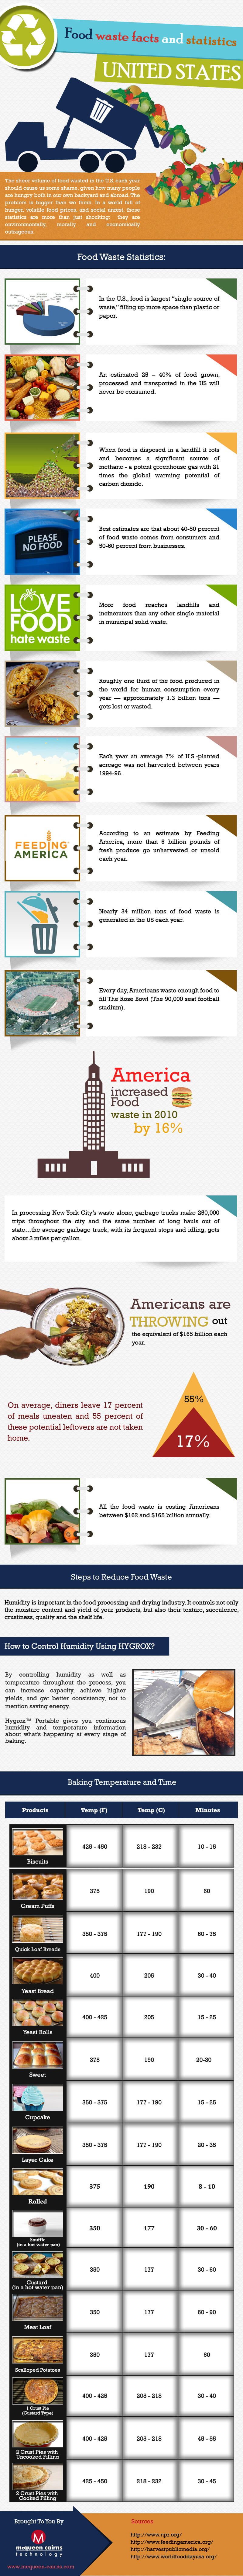 Food Waste in the United States